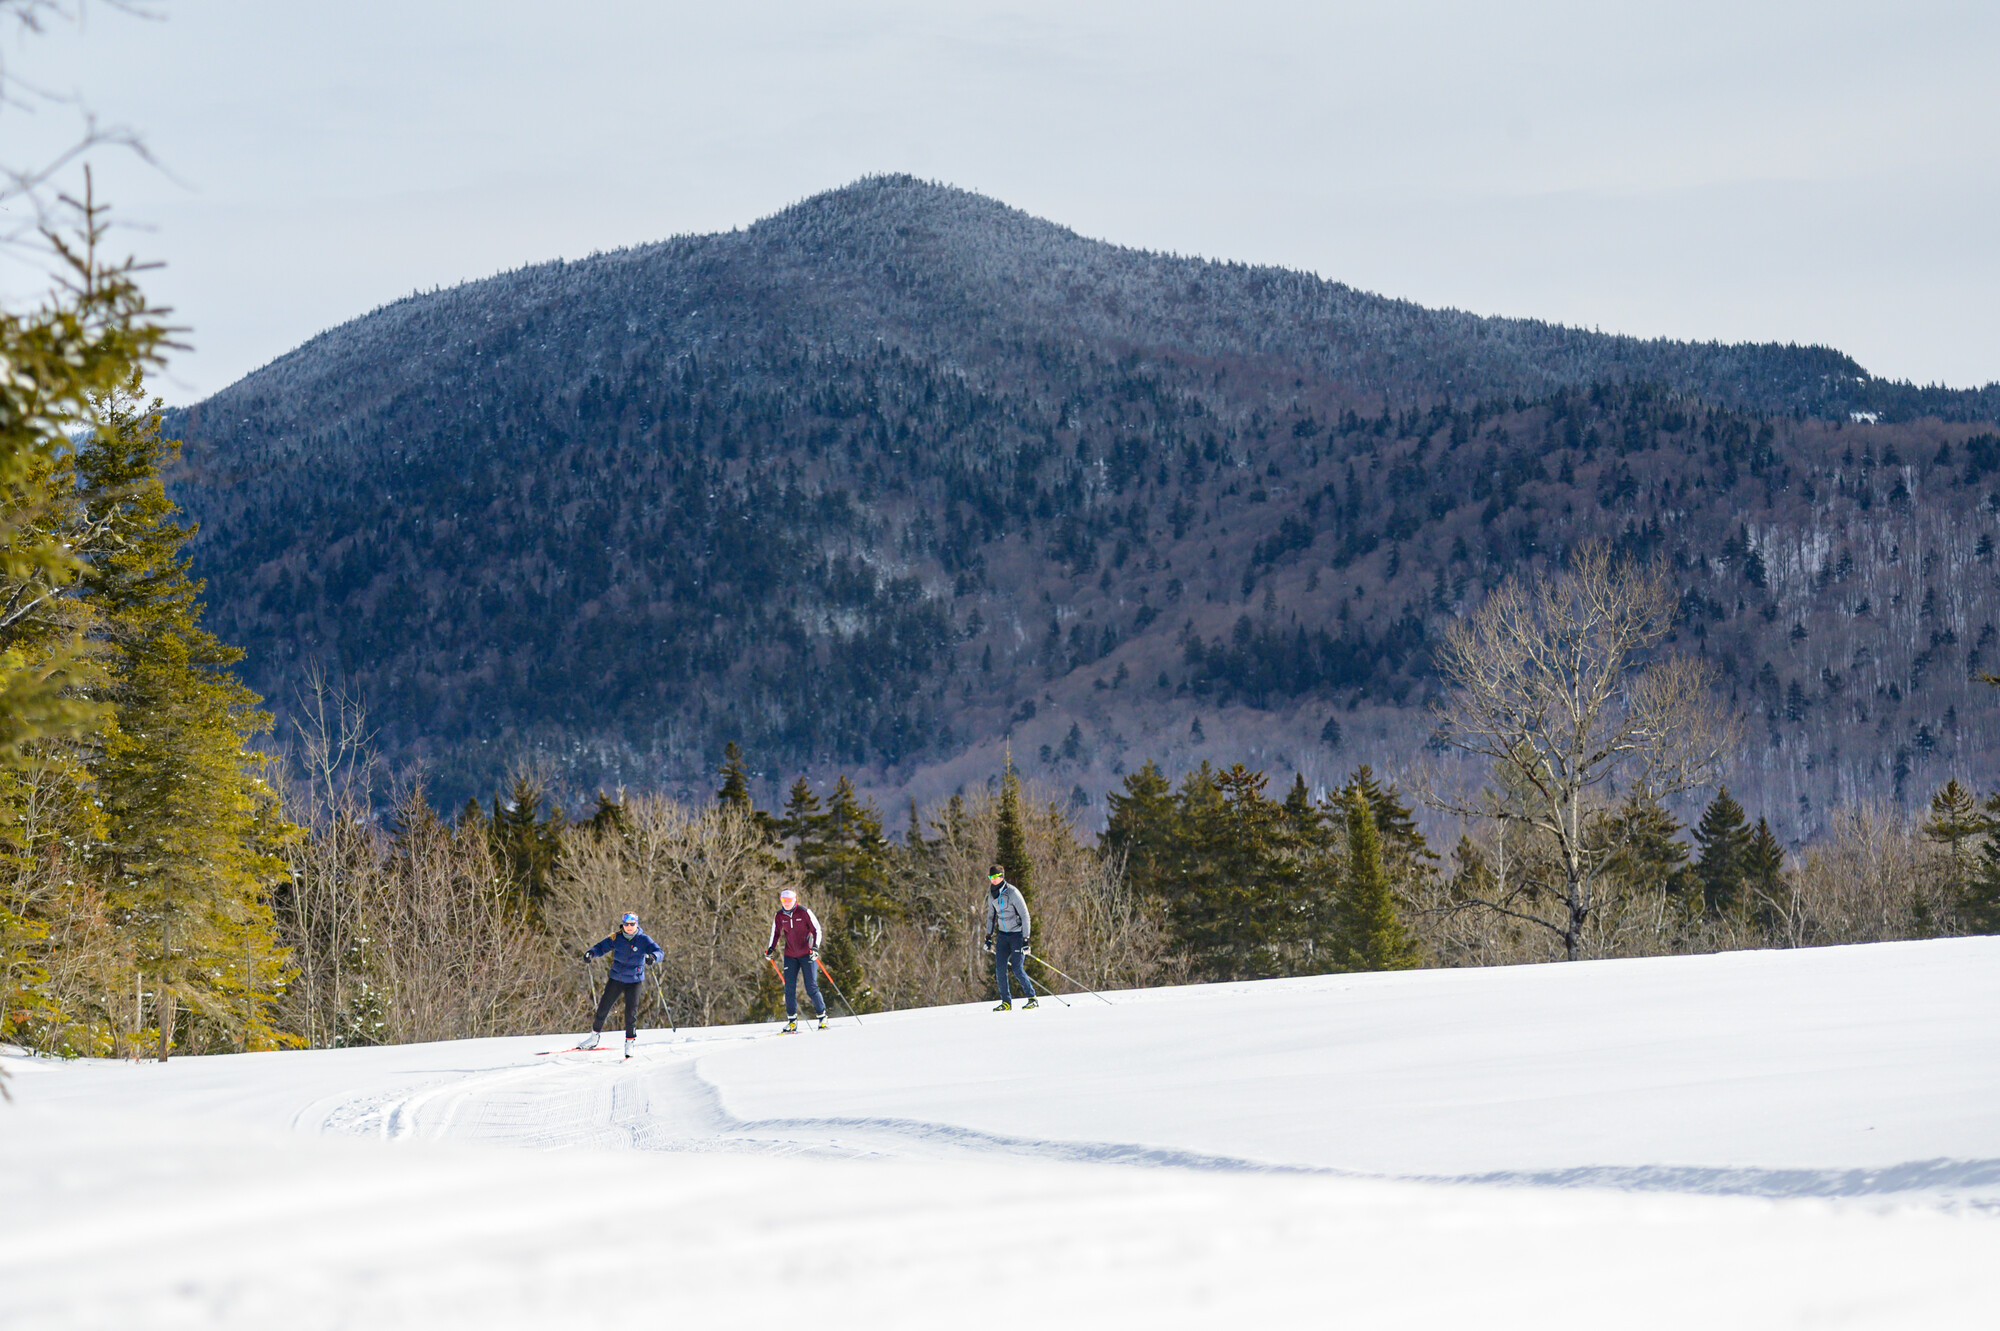 Cross-country skiers glide across snow with an Adirondack peak behind them.